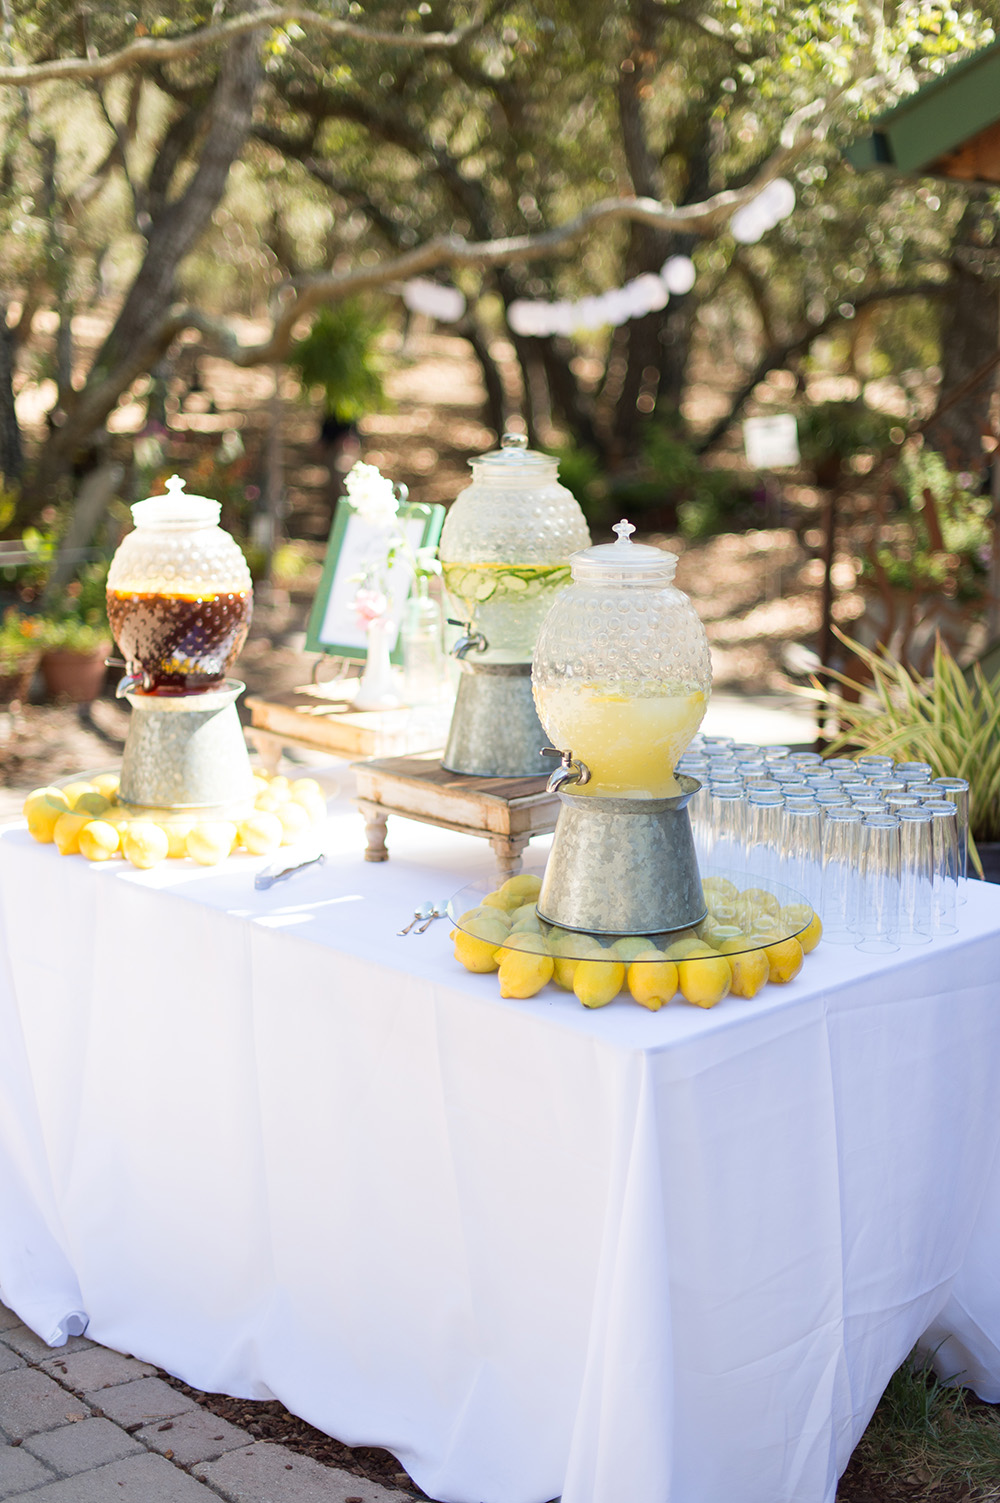 How to host a backyard barbecue wedding bash - Equally Wed